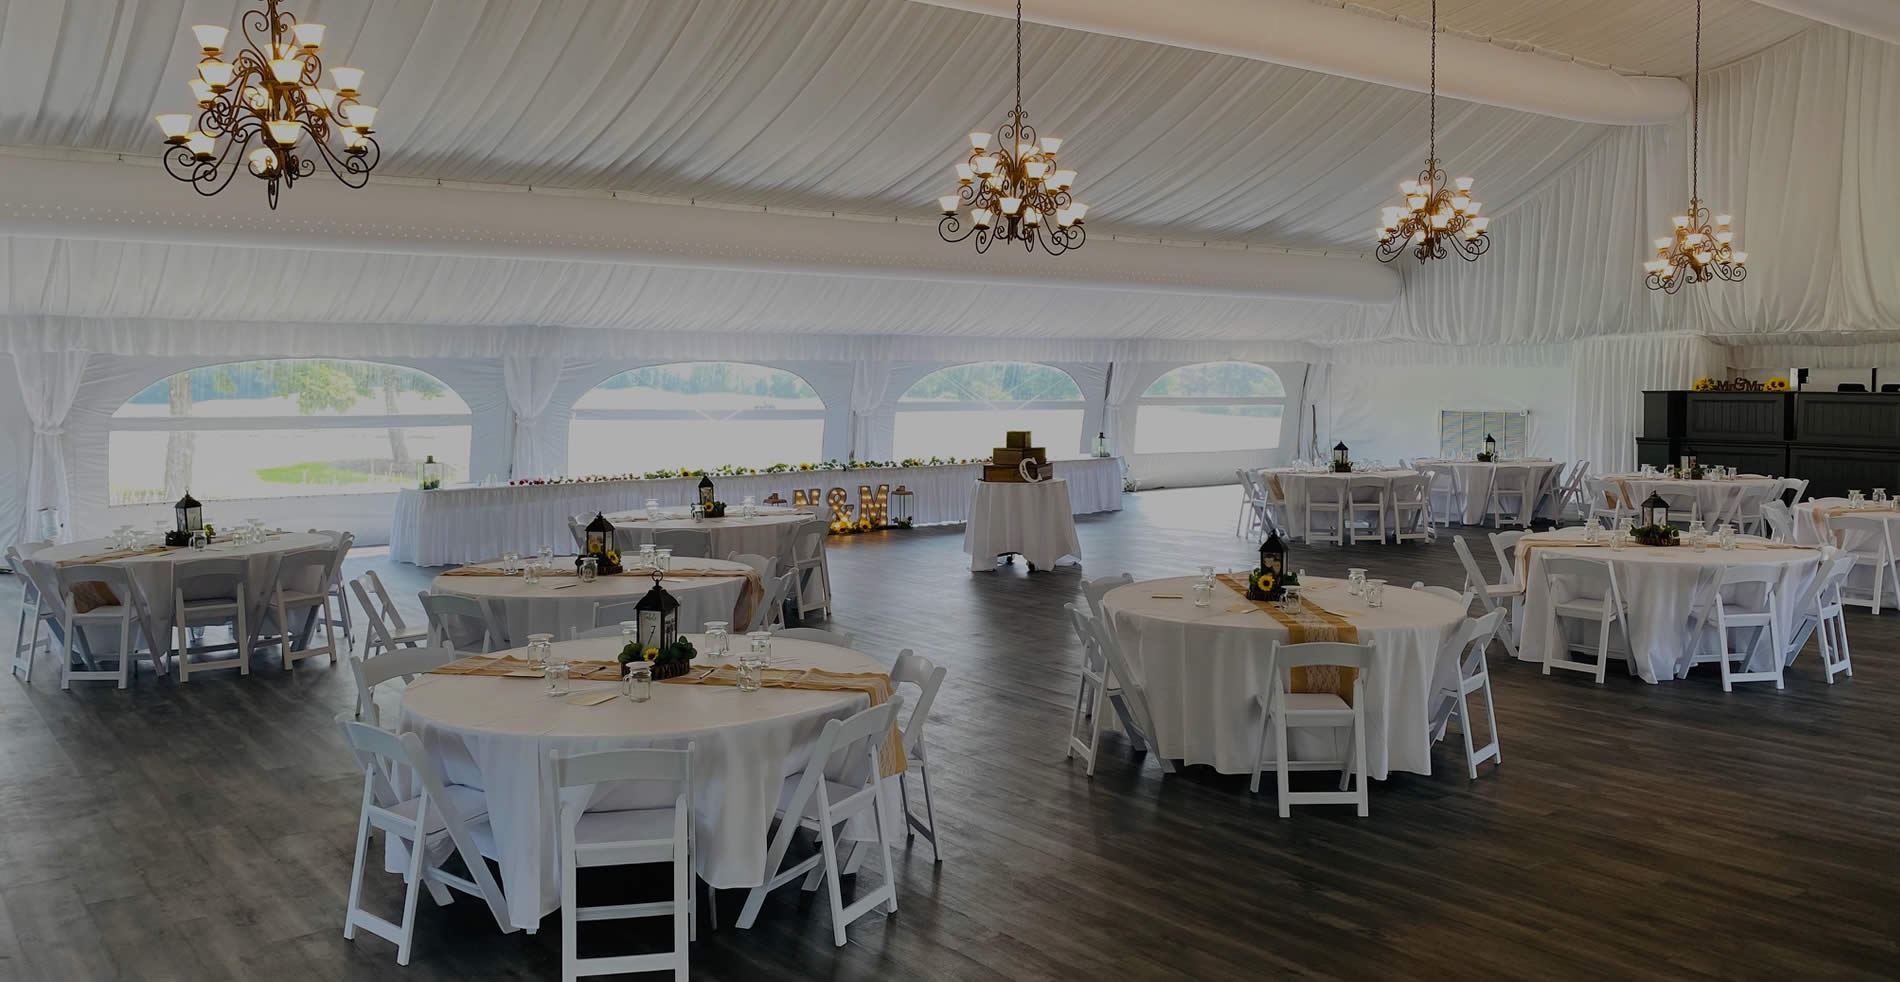 BOOK YOUR NEXT EVENT IN OUR PERMANENT OUTDOOR TENT